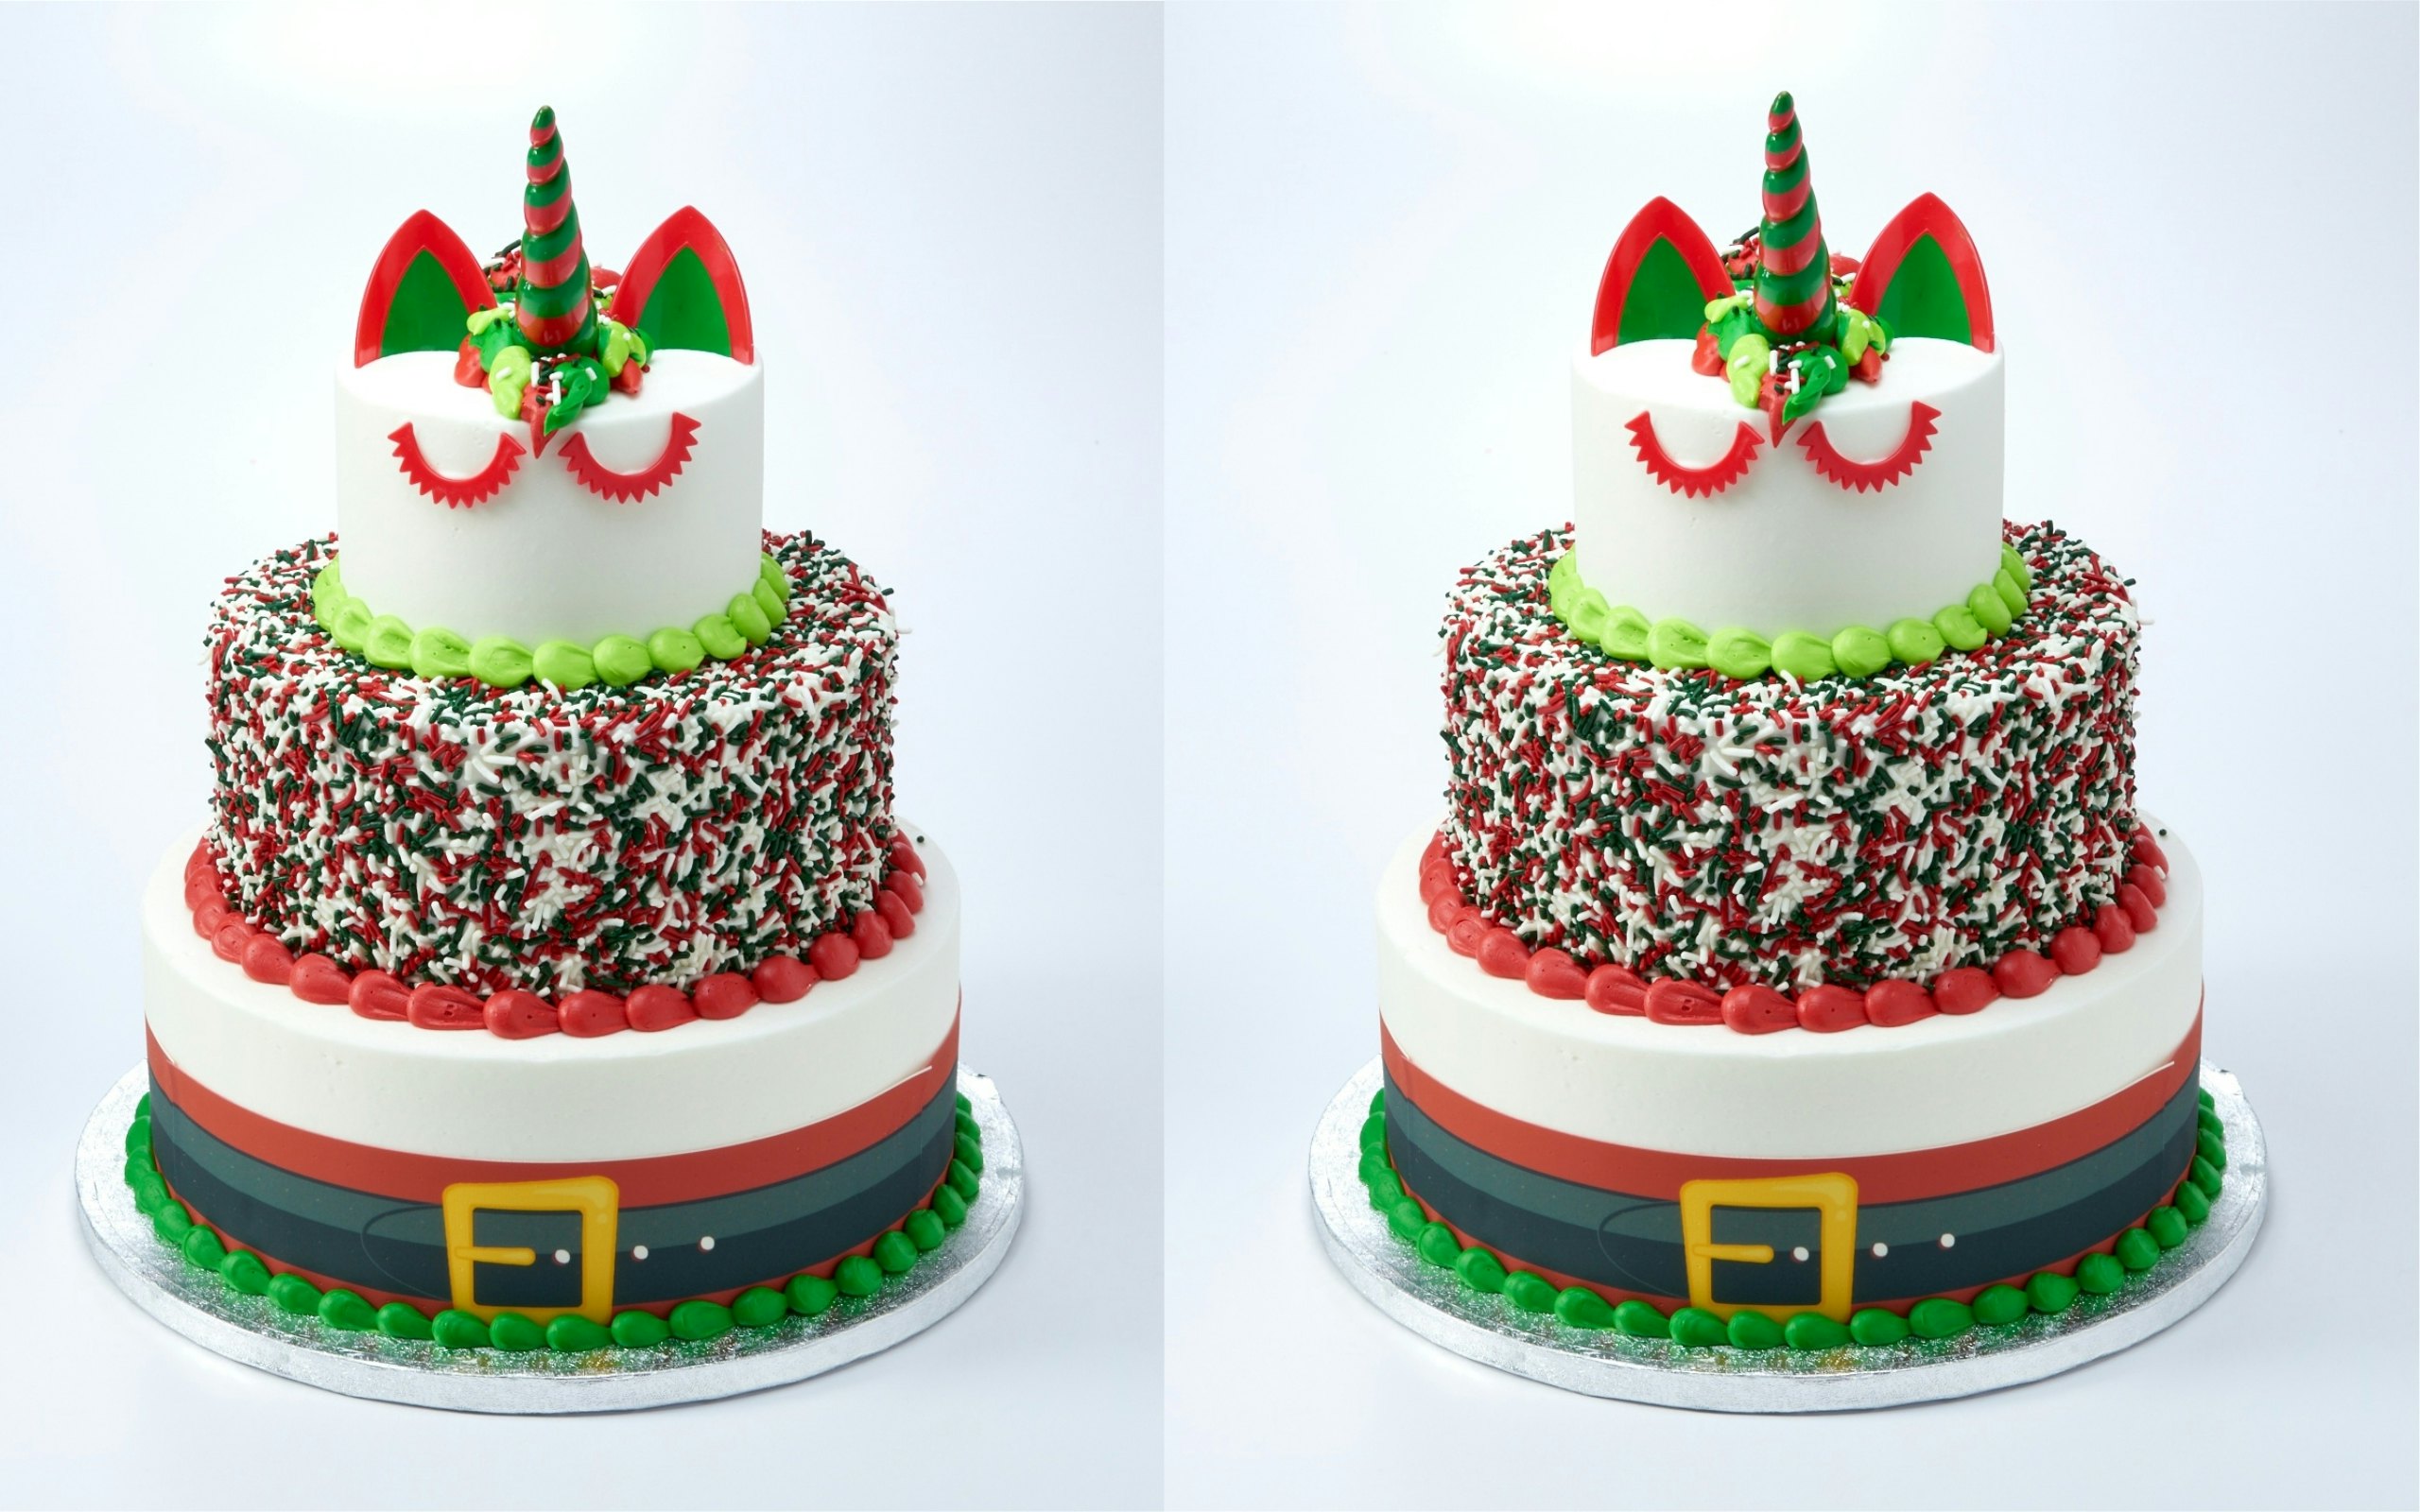 The 3 Tier Christmas Unicorn Cake At Sams Club Is A Must Have For